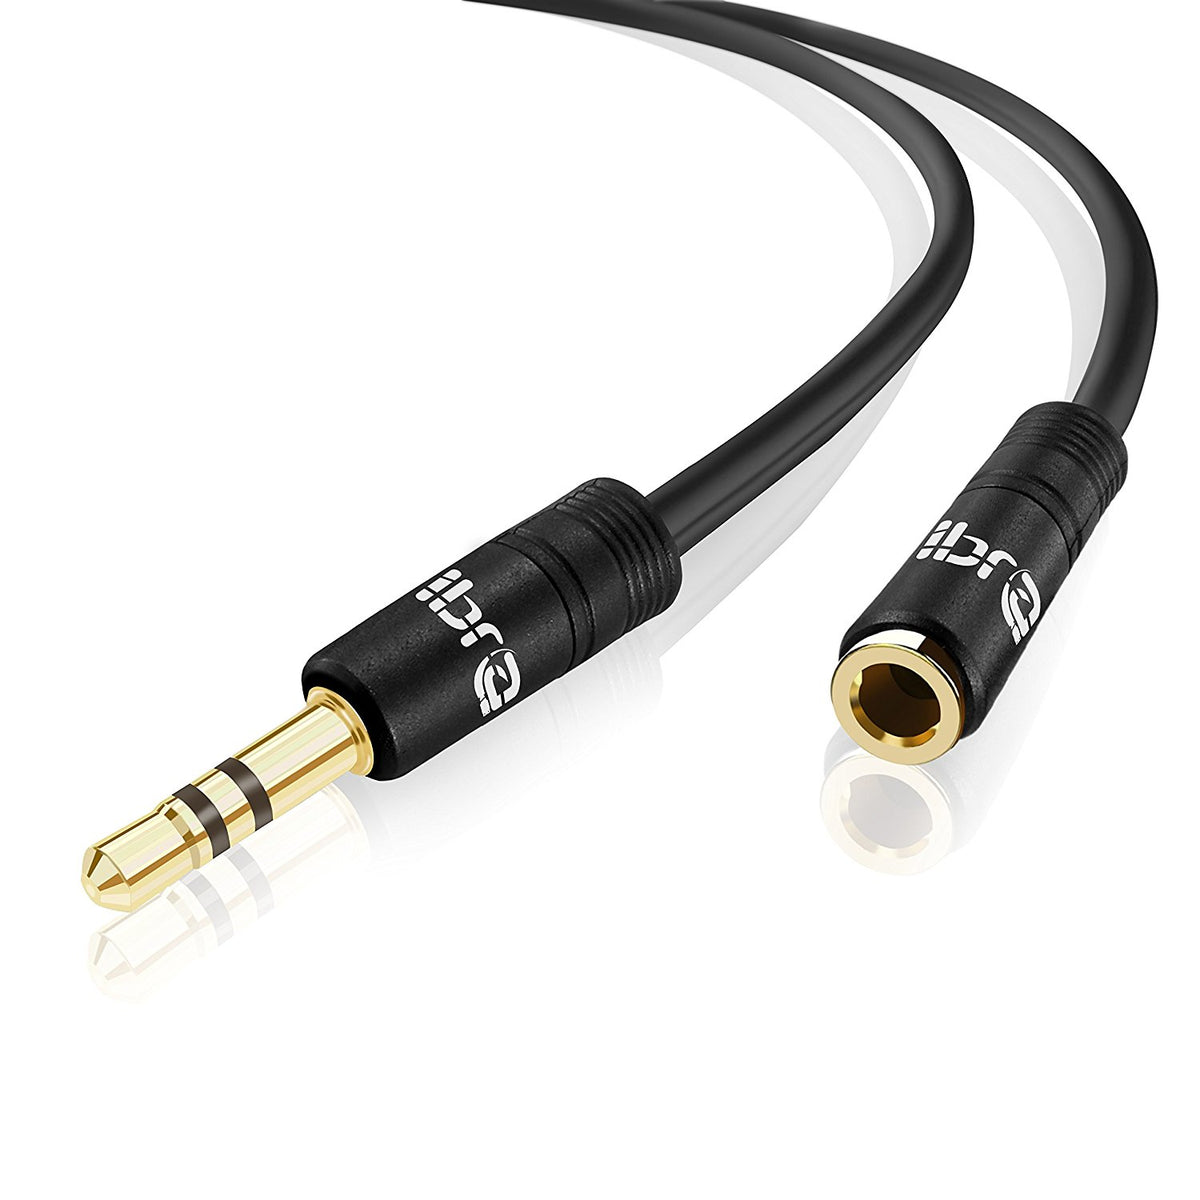 IBRA 7.5M Stereo Jack Extension Cable 3.5mm Male > 3.5mm Female - Black